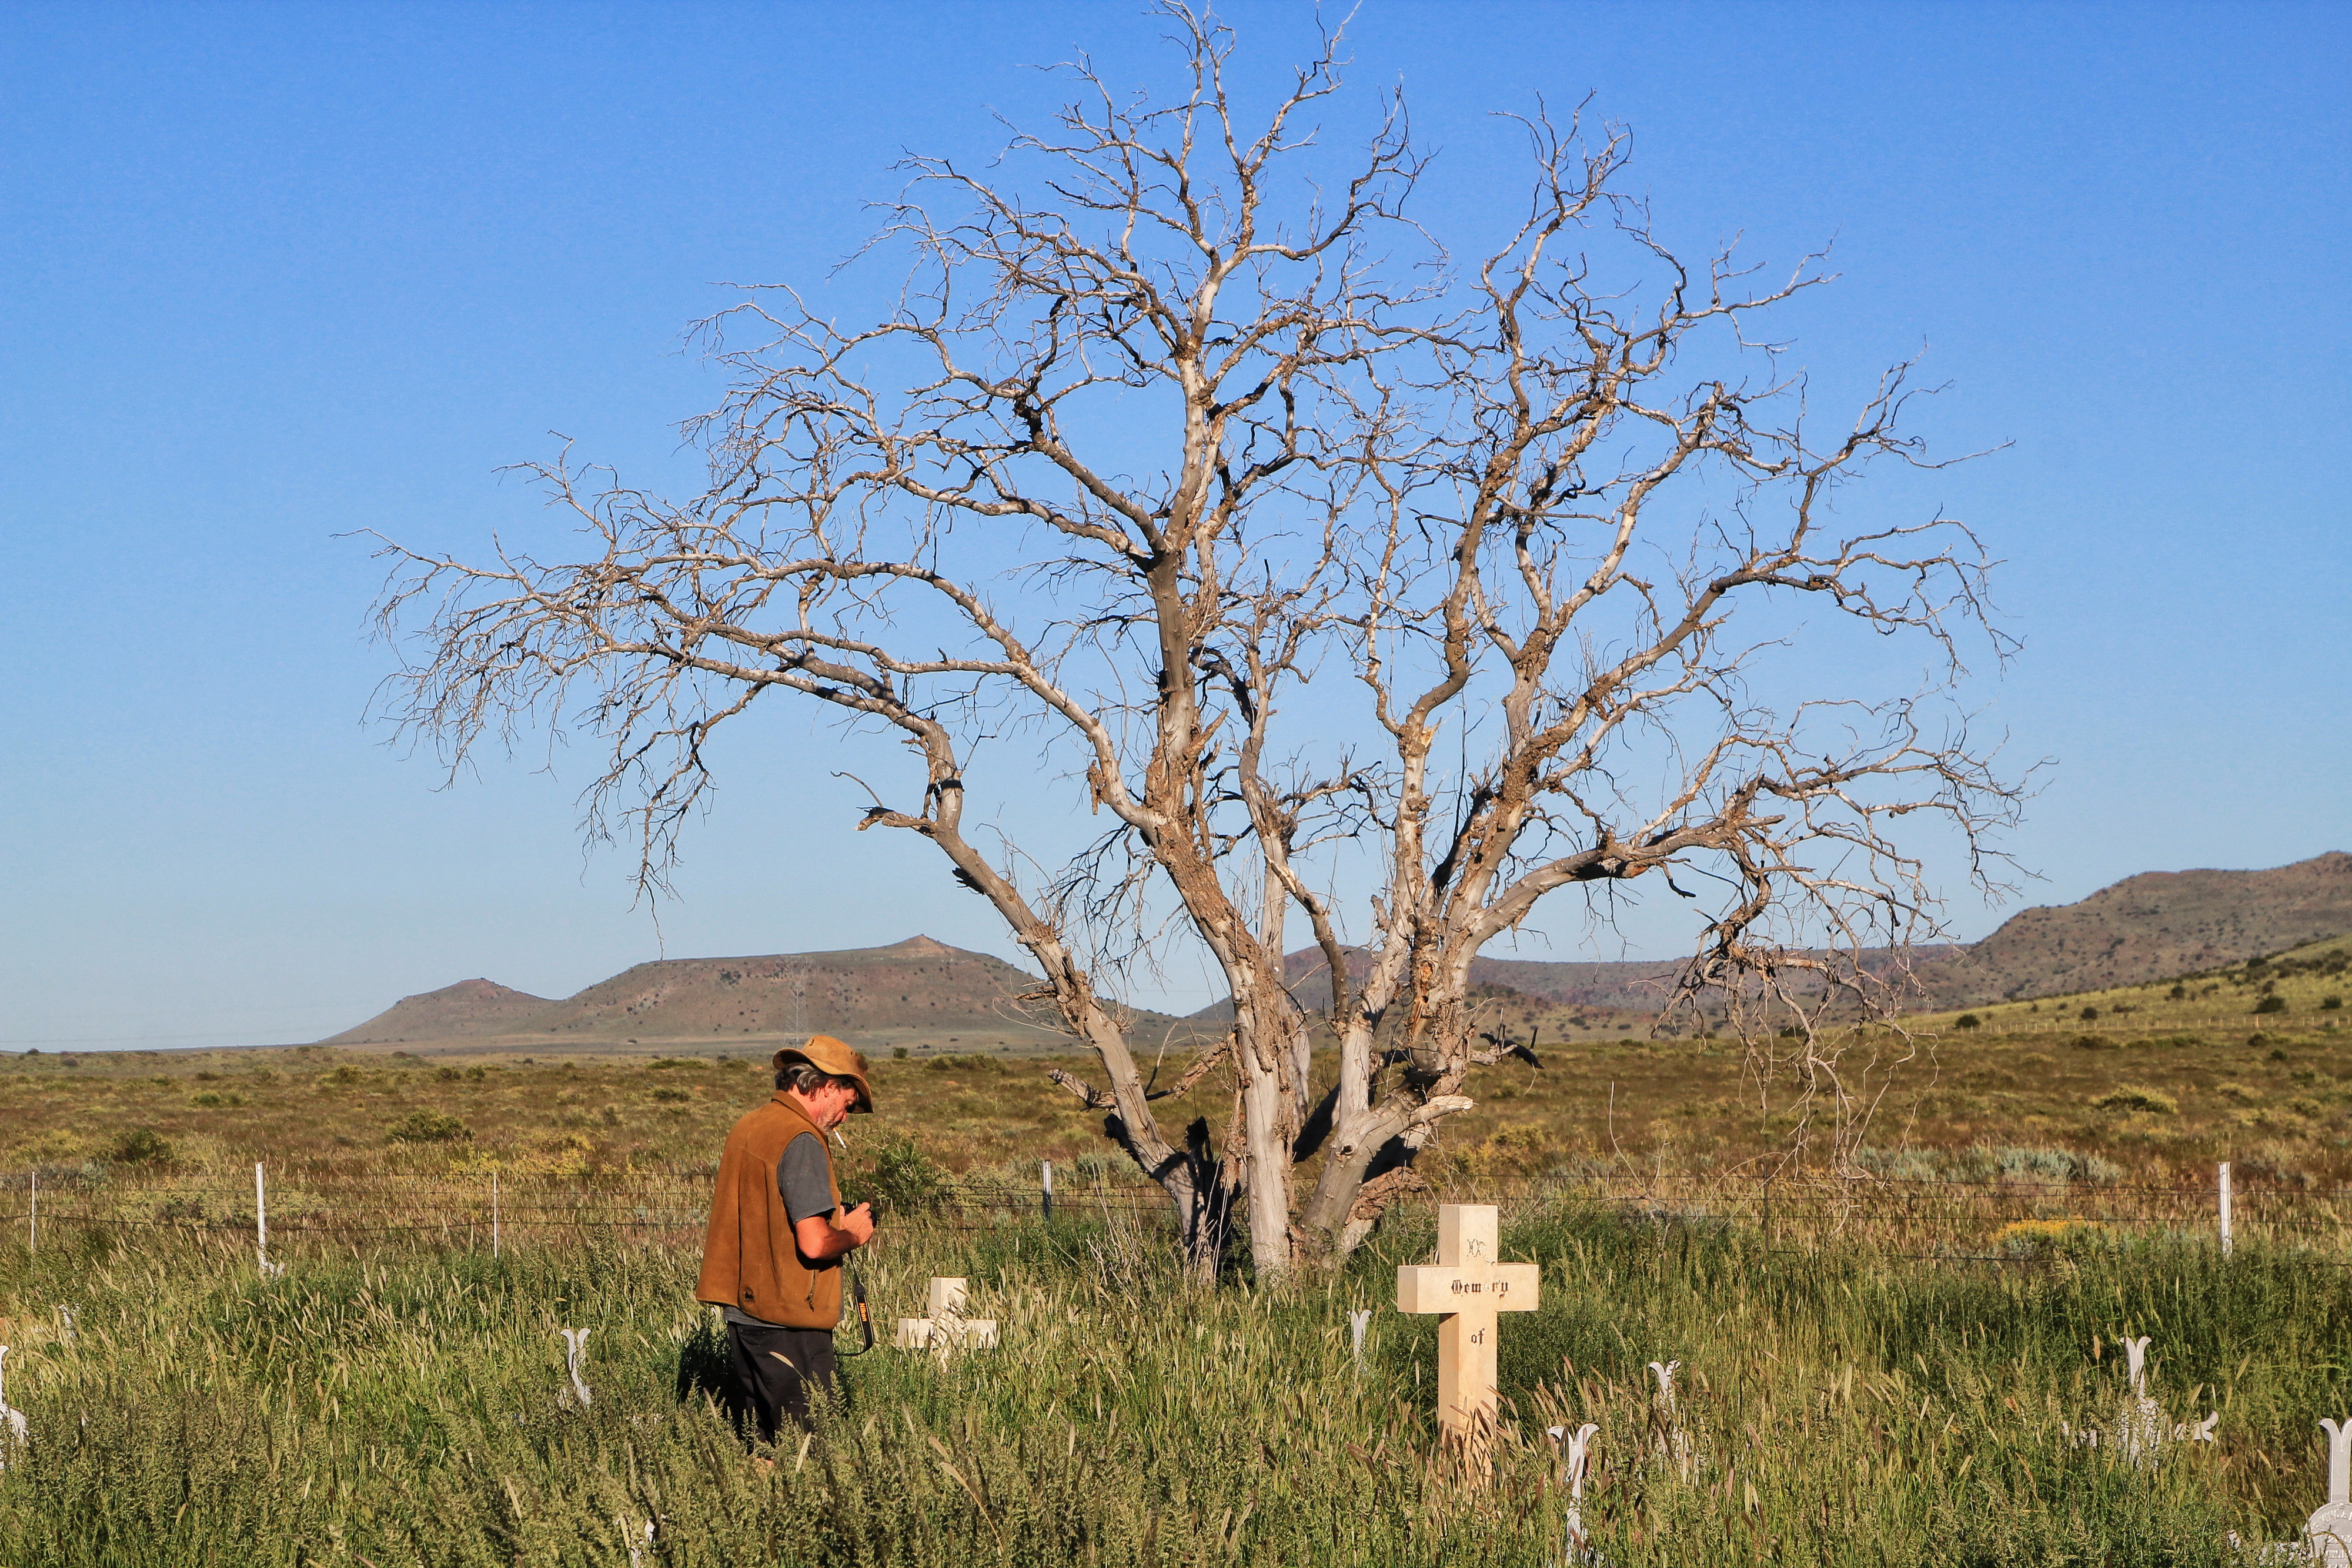 One of the skeletal trees that stand guard over the Deelfontein gravesite.